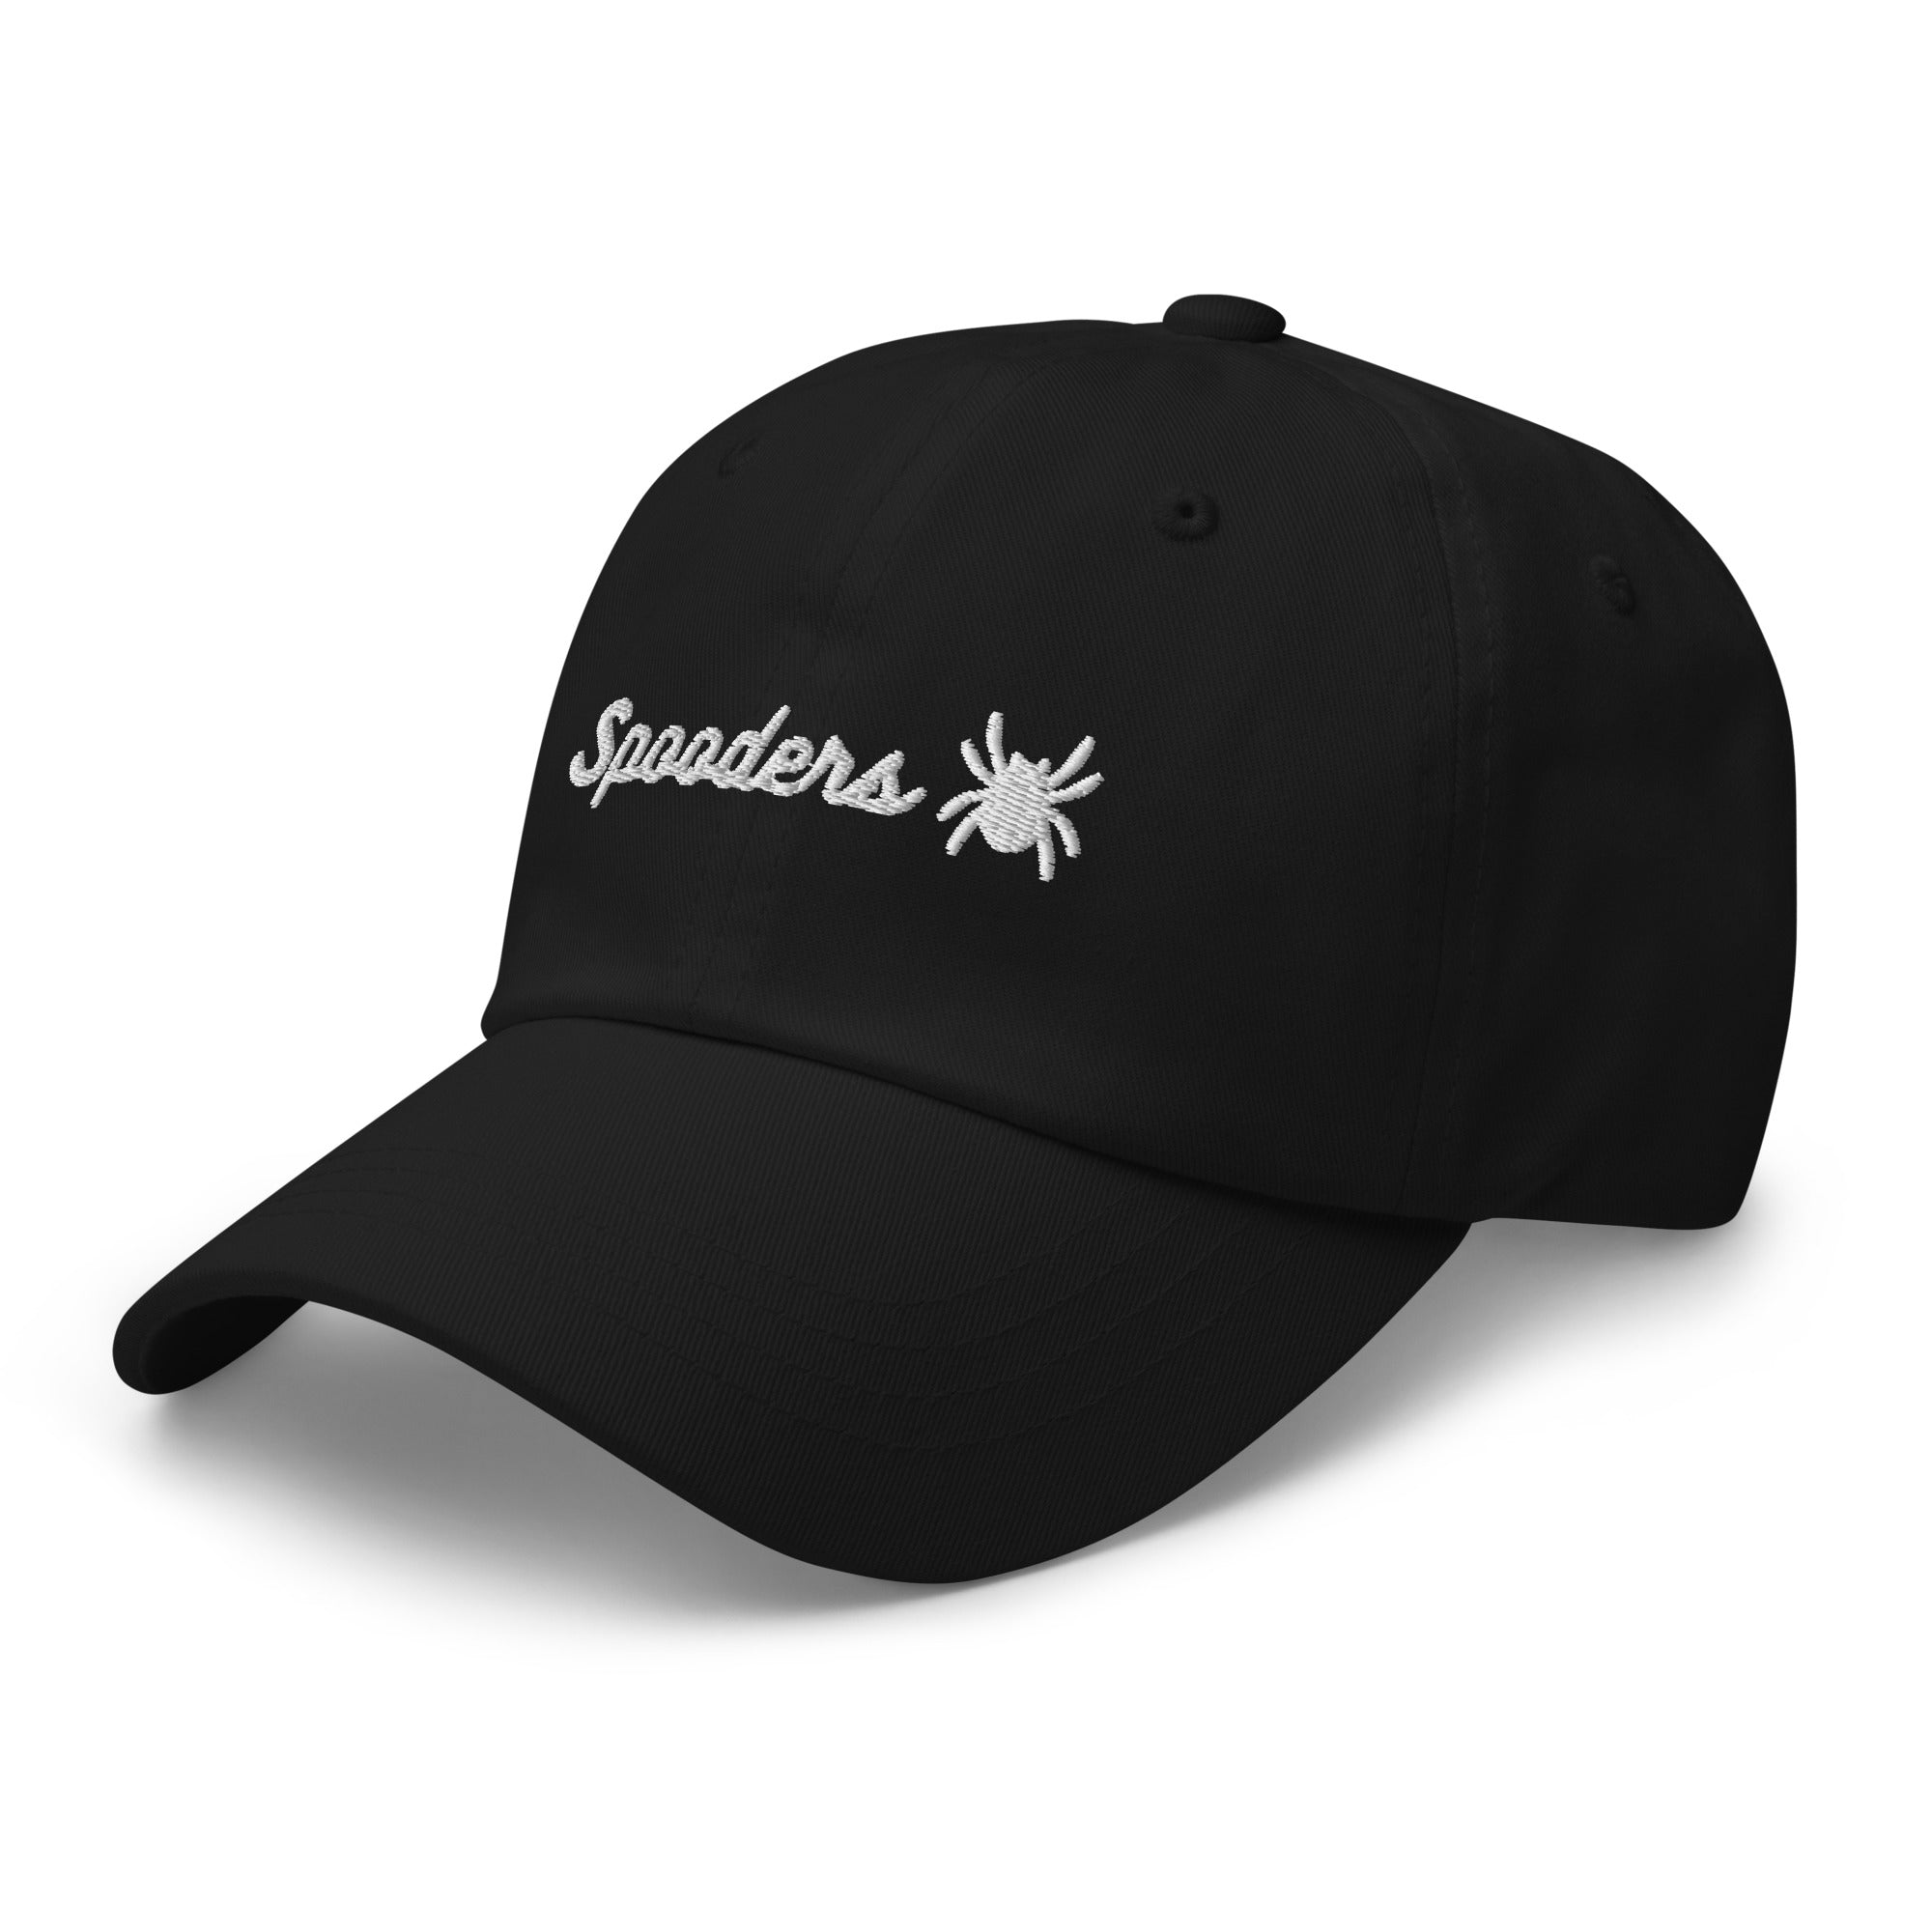 Spooders Dad hat - Jumping Spiders For Sale - Spiders Source - #1 Regal Jumping Spider Store